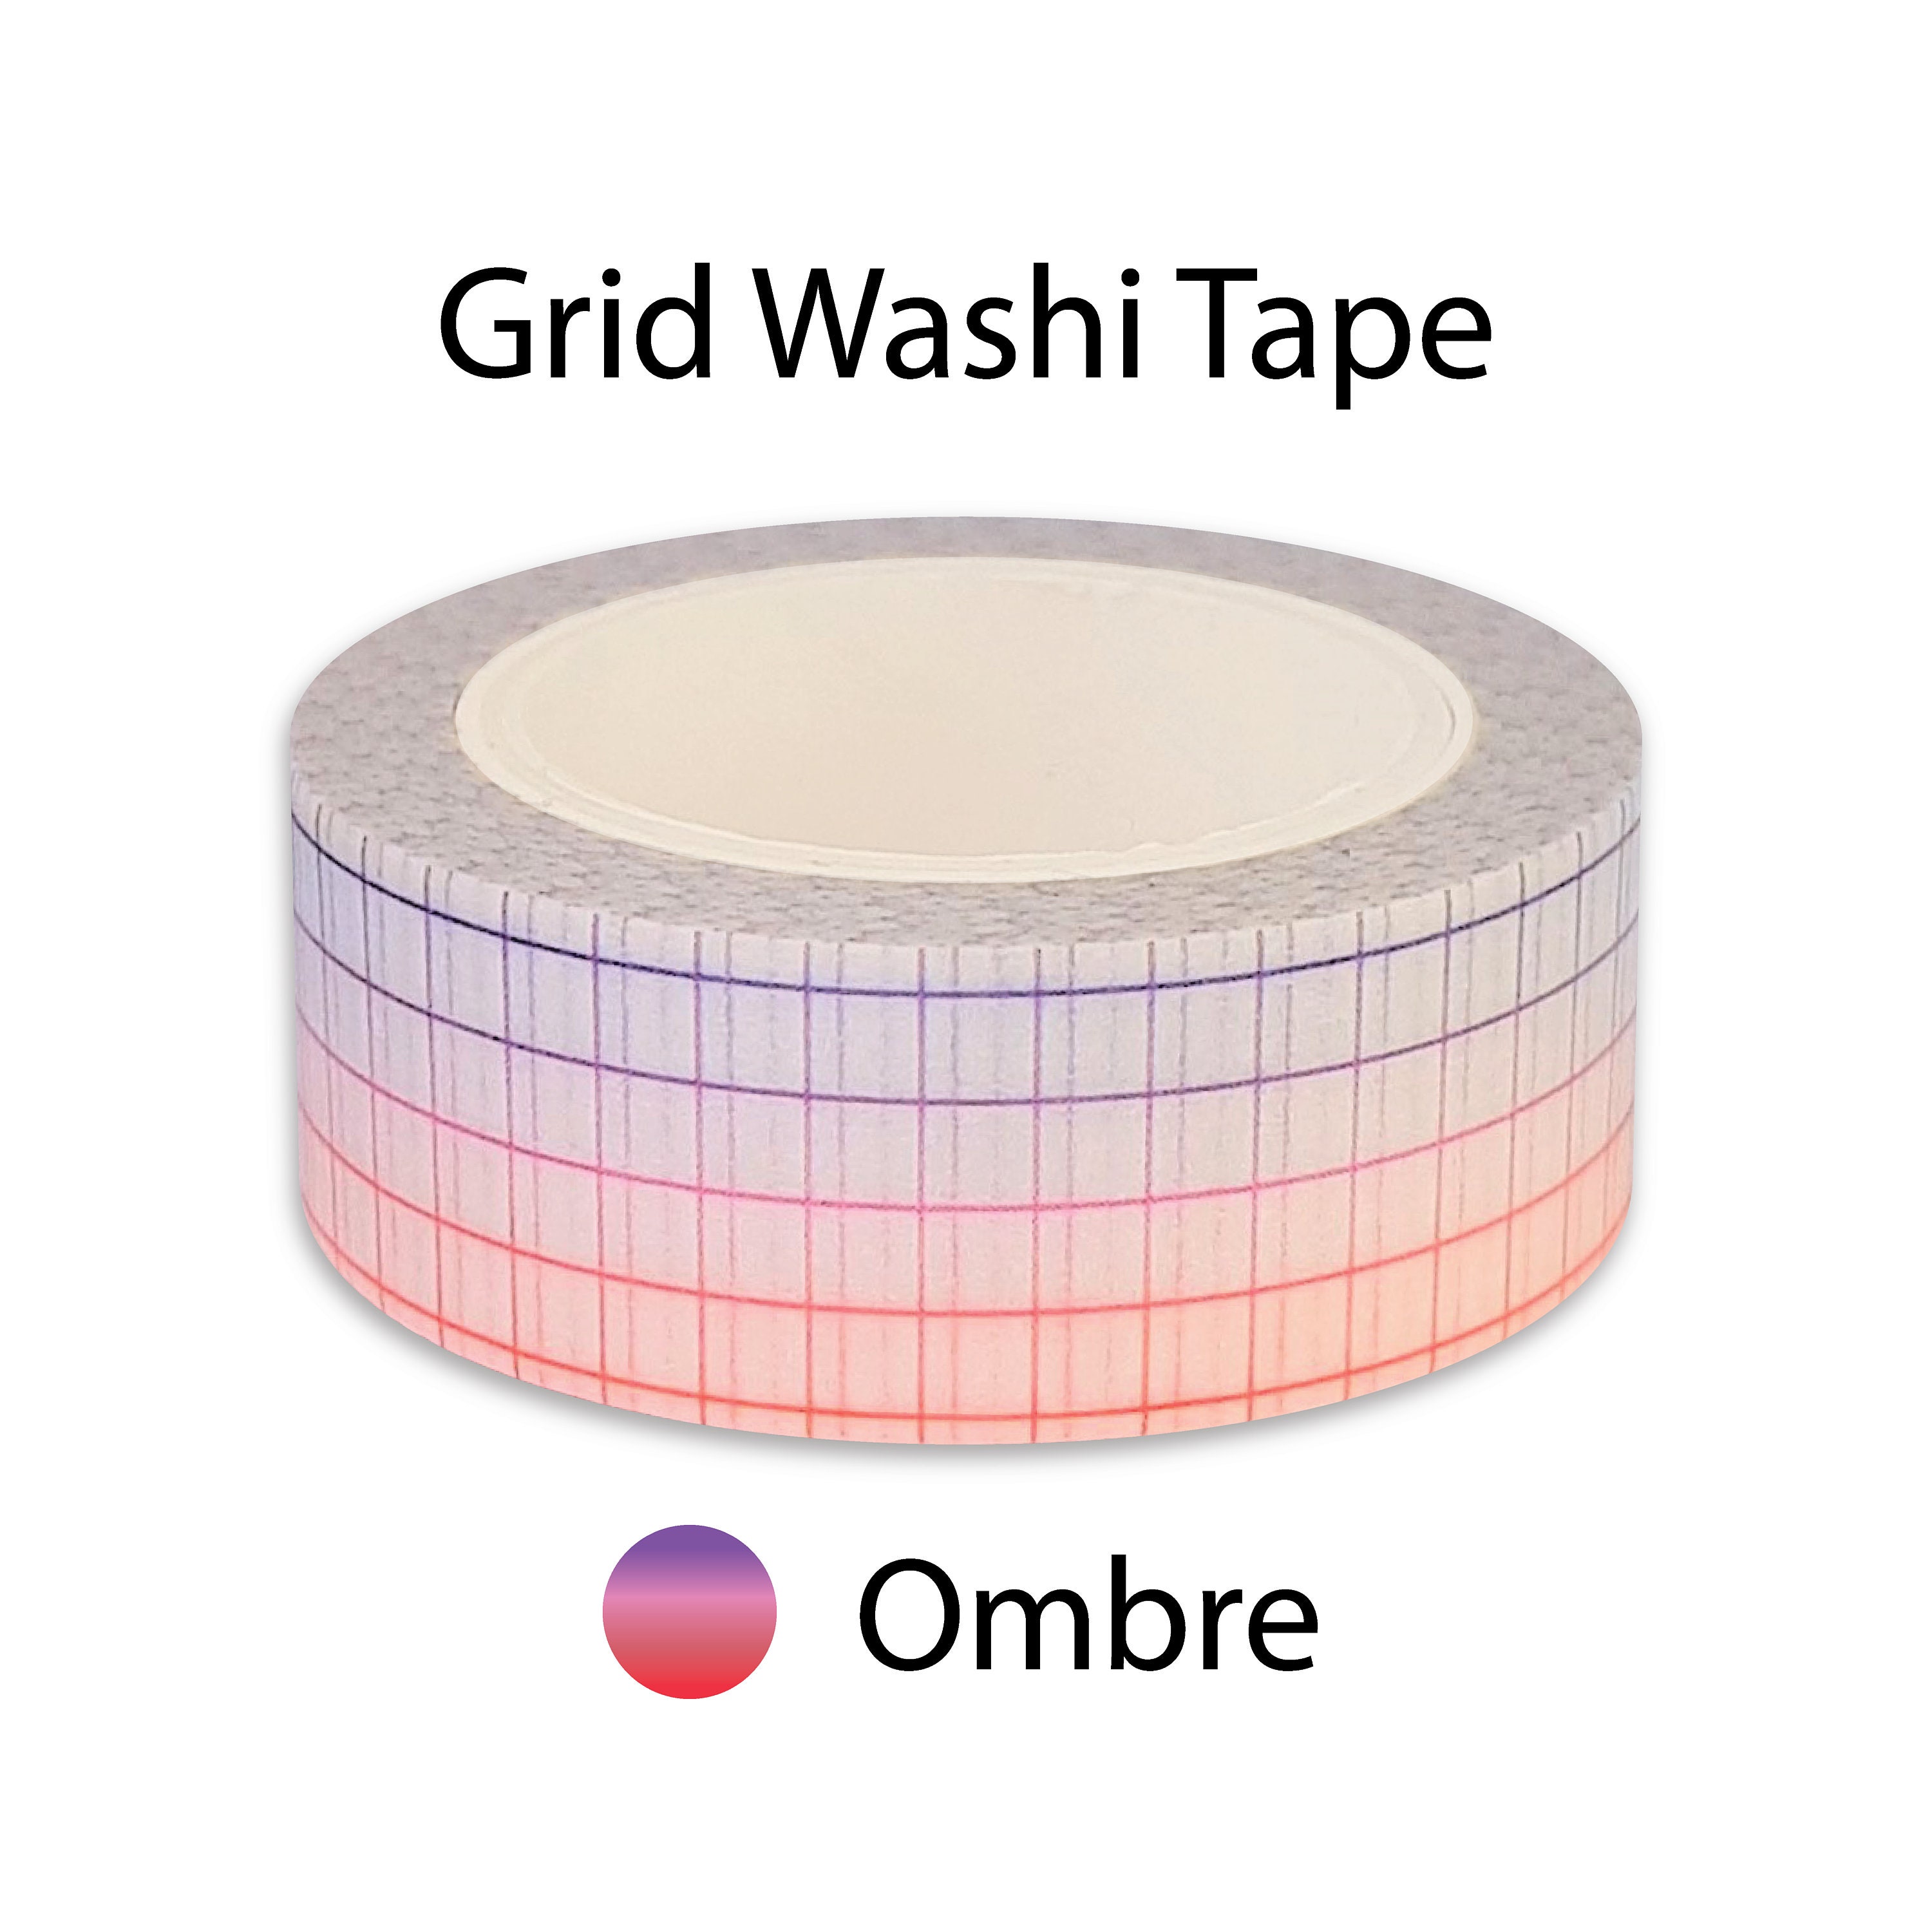 White with Bright Purple Grid - Washi tape